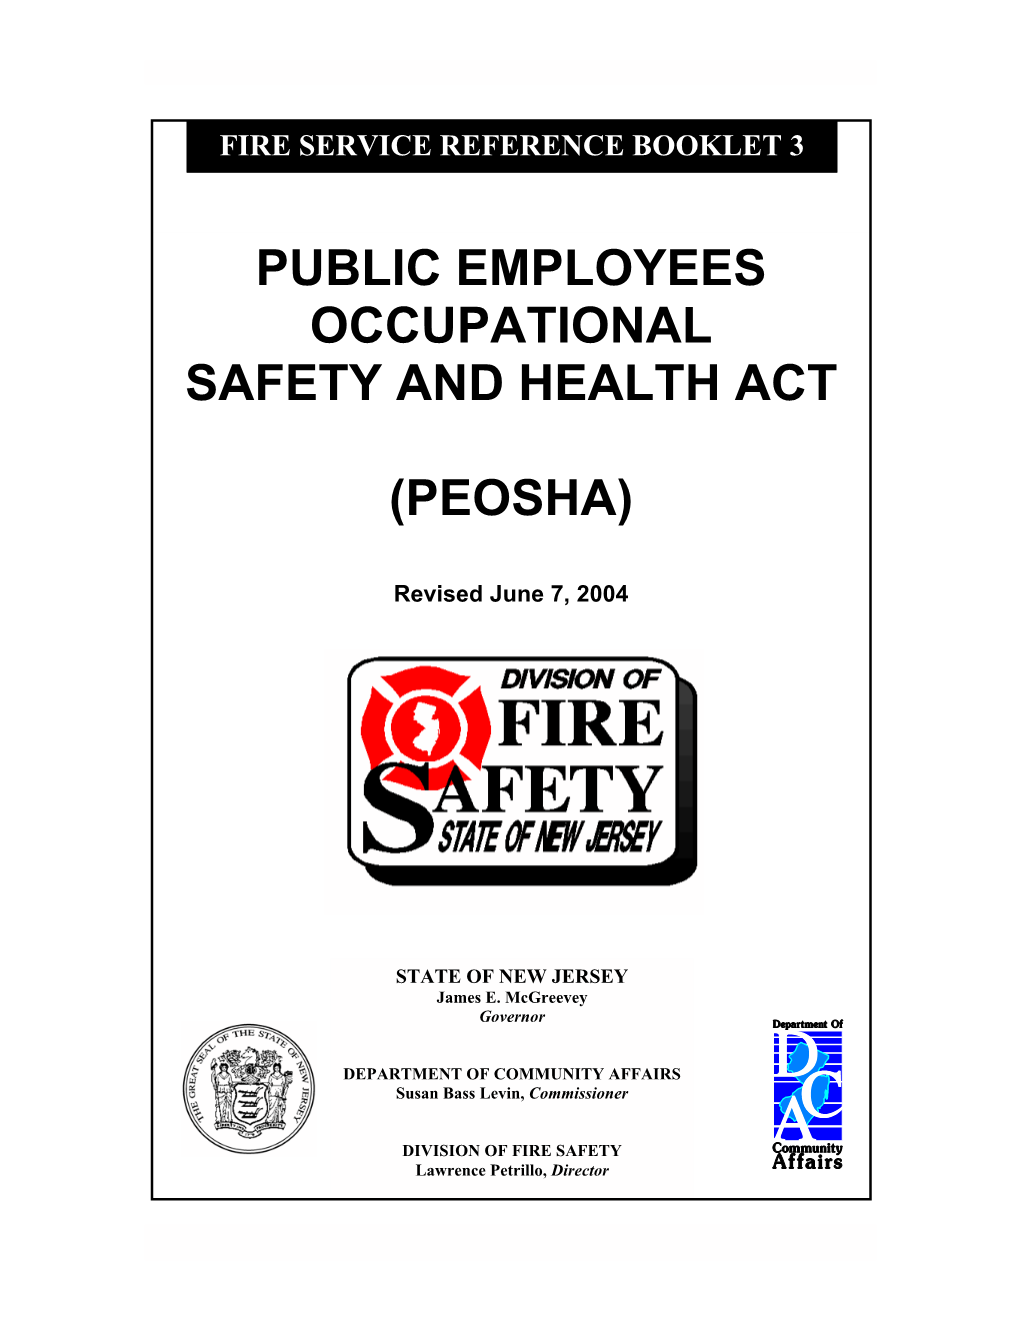 Public Employees Occupational Safety and Health Act